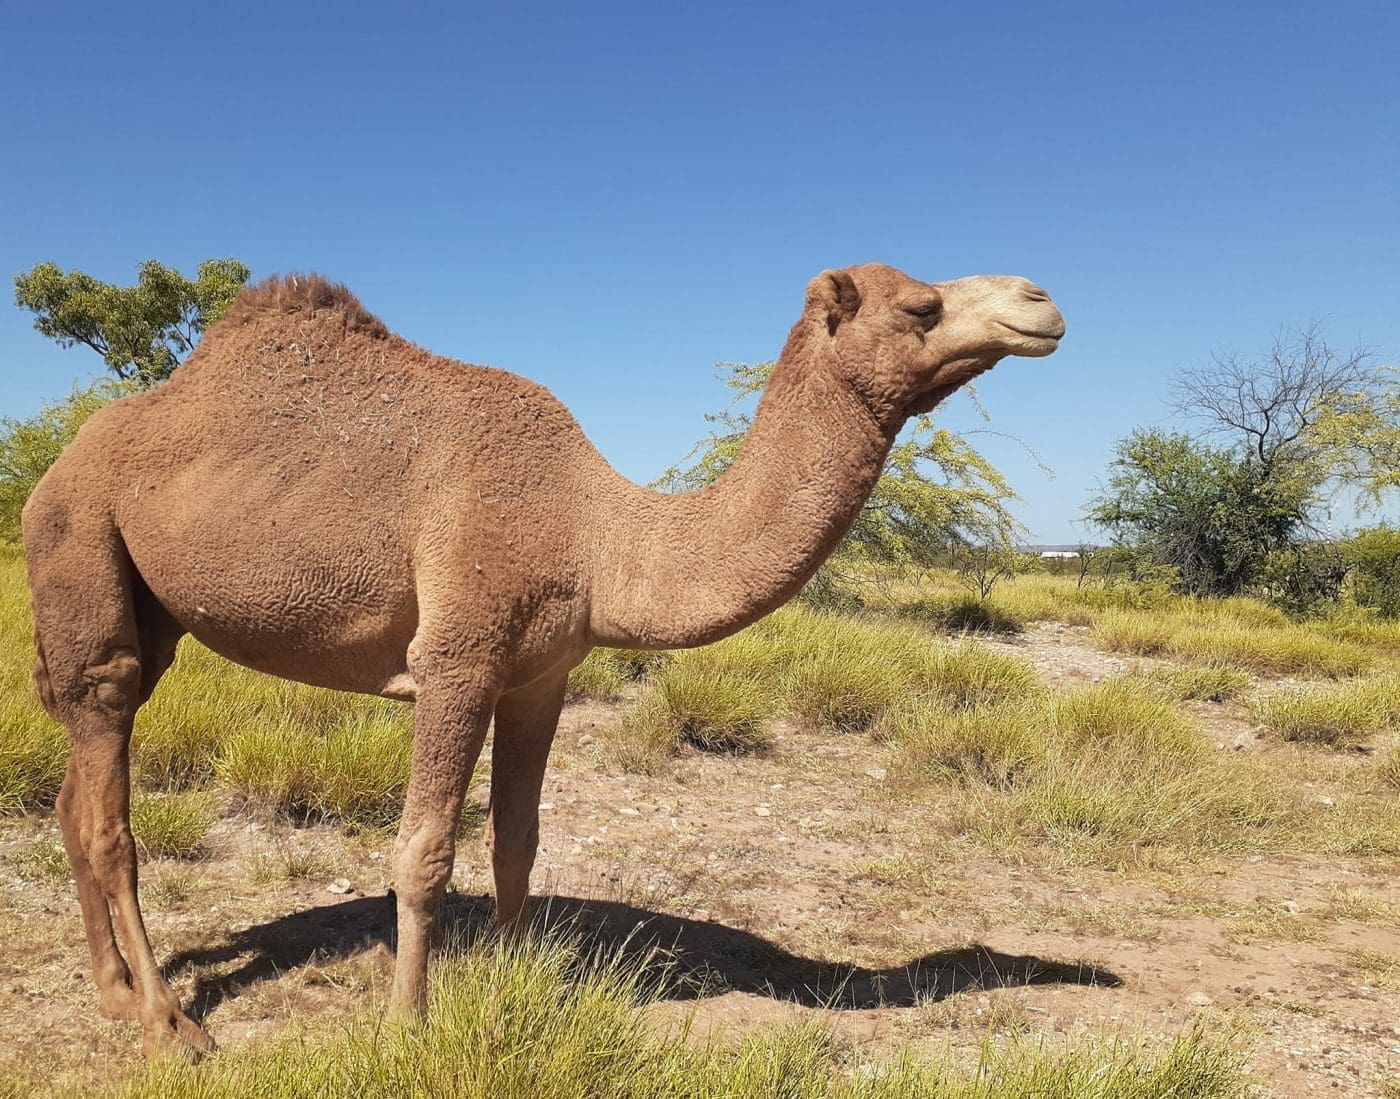 Camels can integrate well with cattle and help control weeds